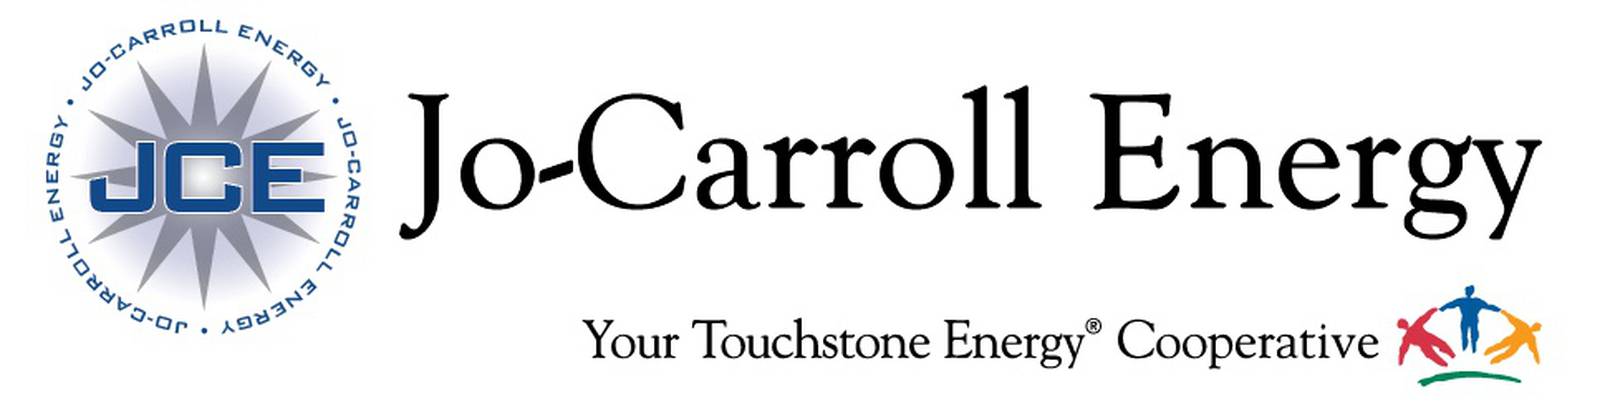 jo-carroll-energy-holds-annual-meeting-shaw-local